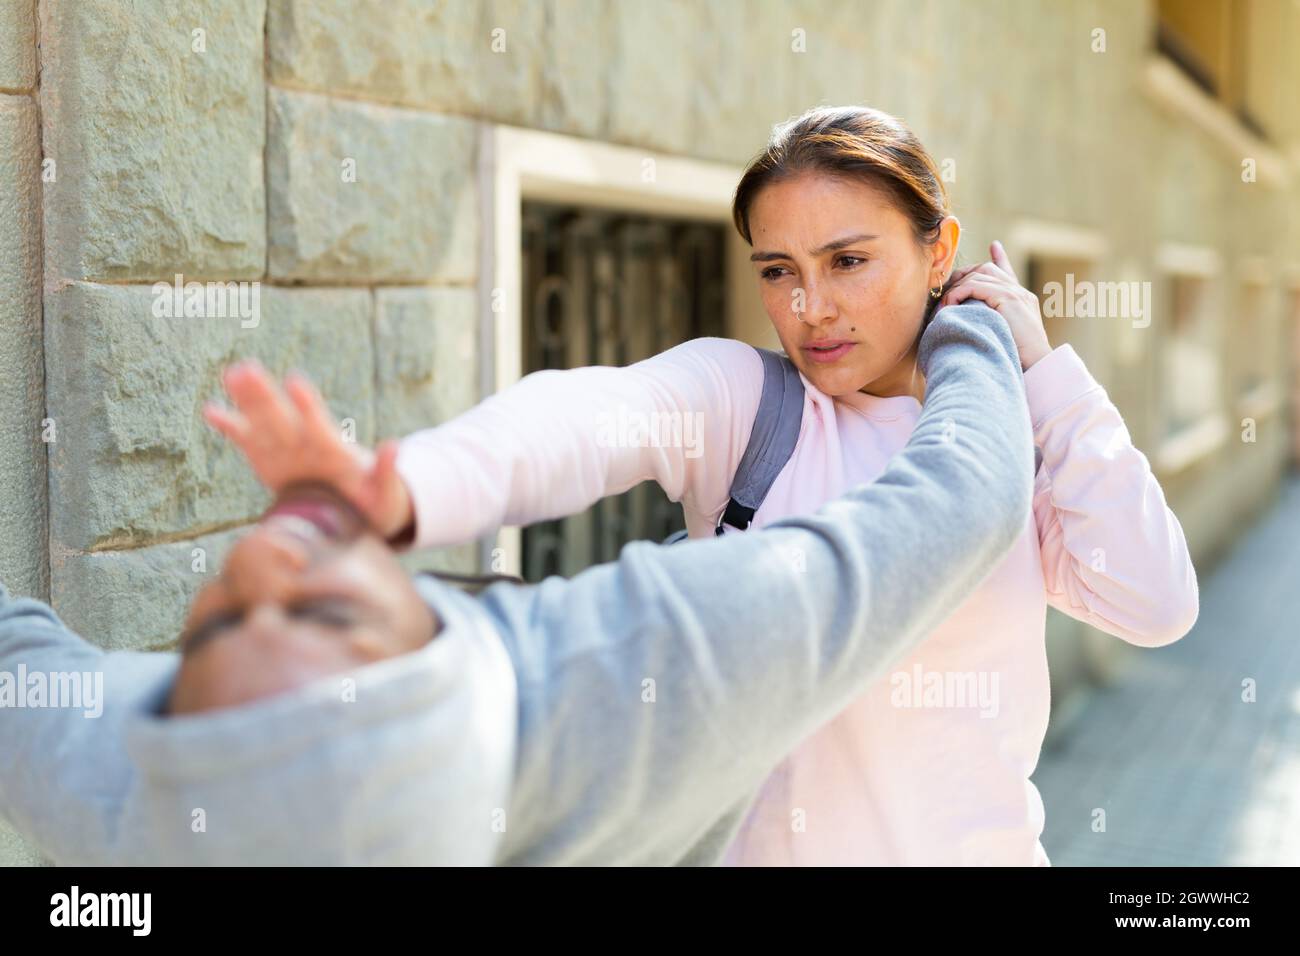 Strong woman using forceful blow in the eyes of rapist on street Stock Photo